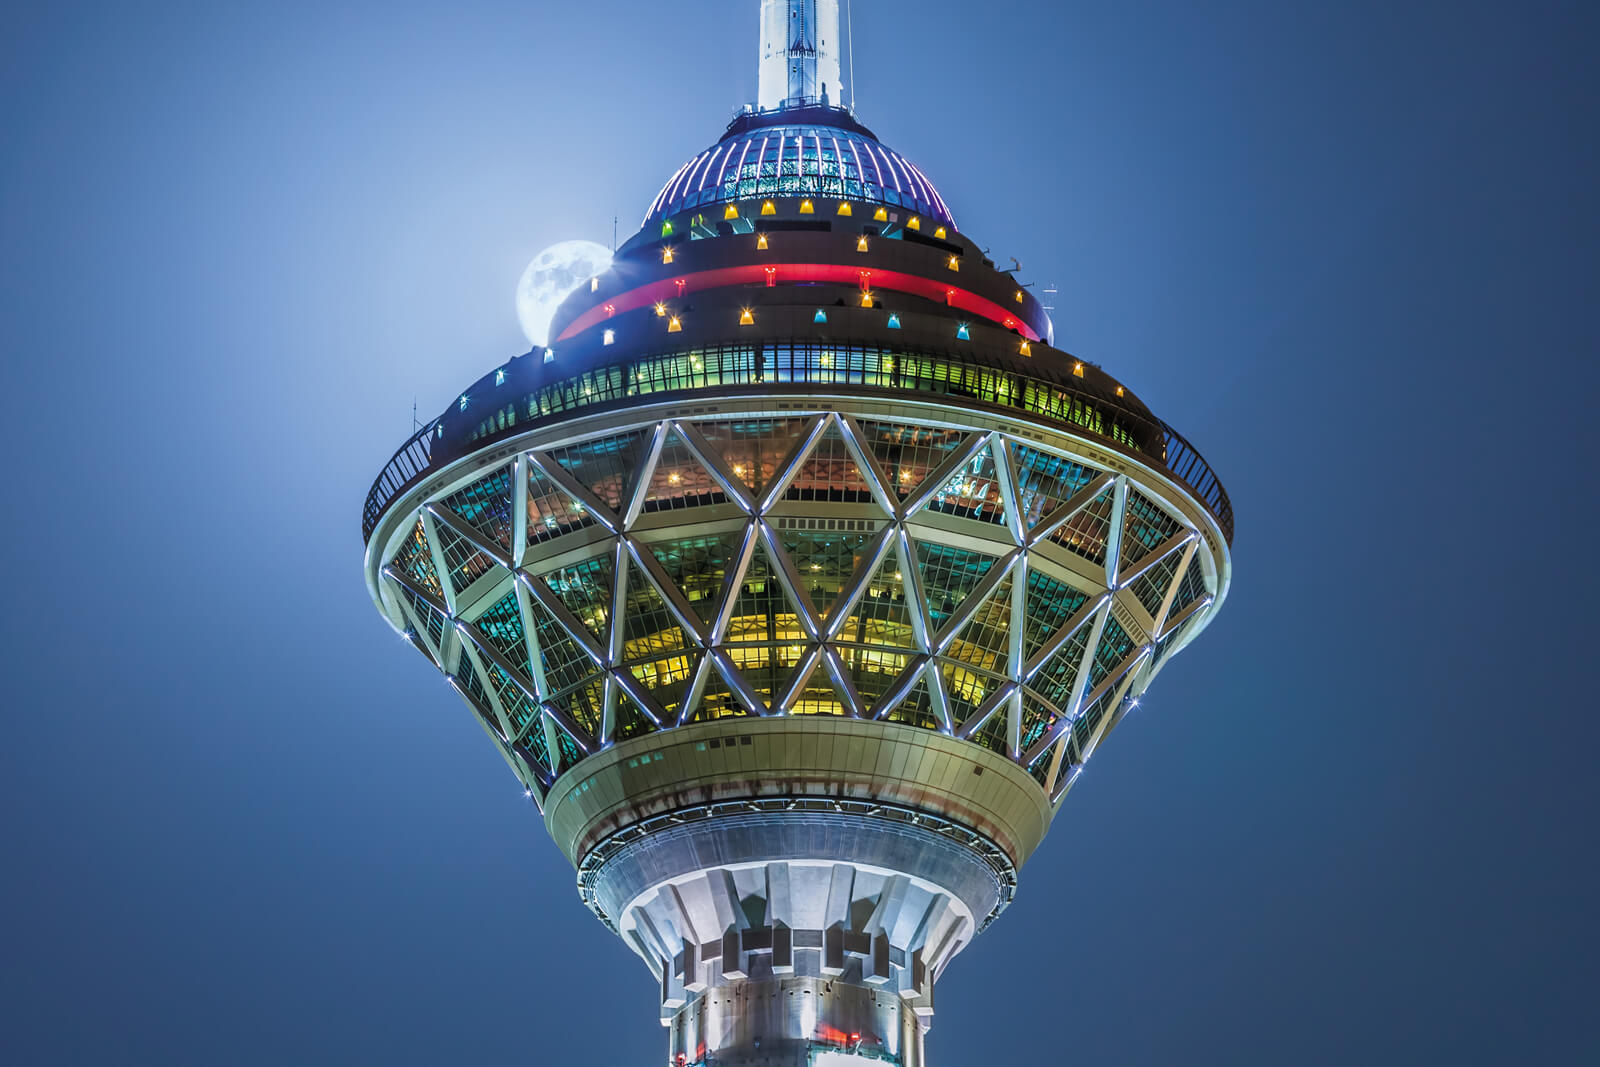 MILAD TOWER WITH MOON